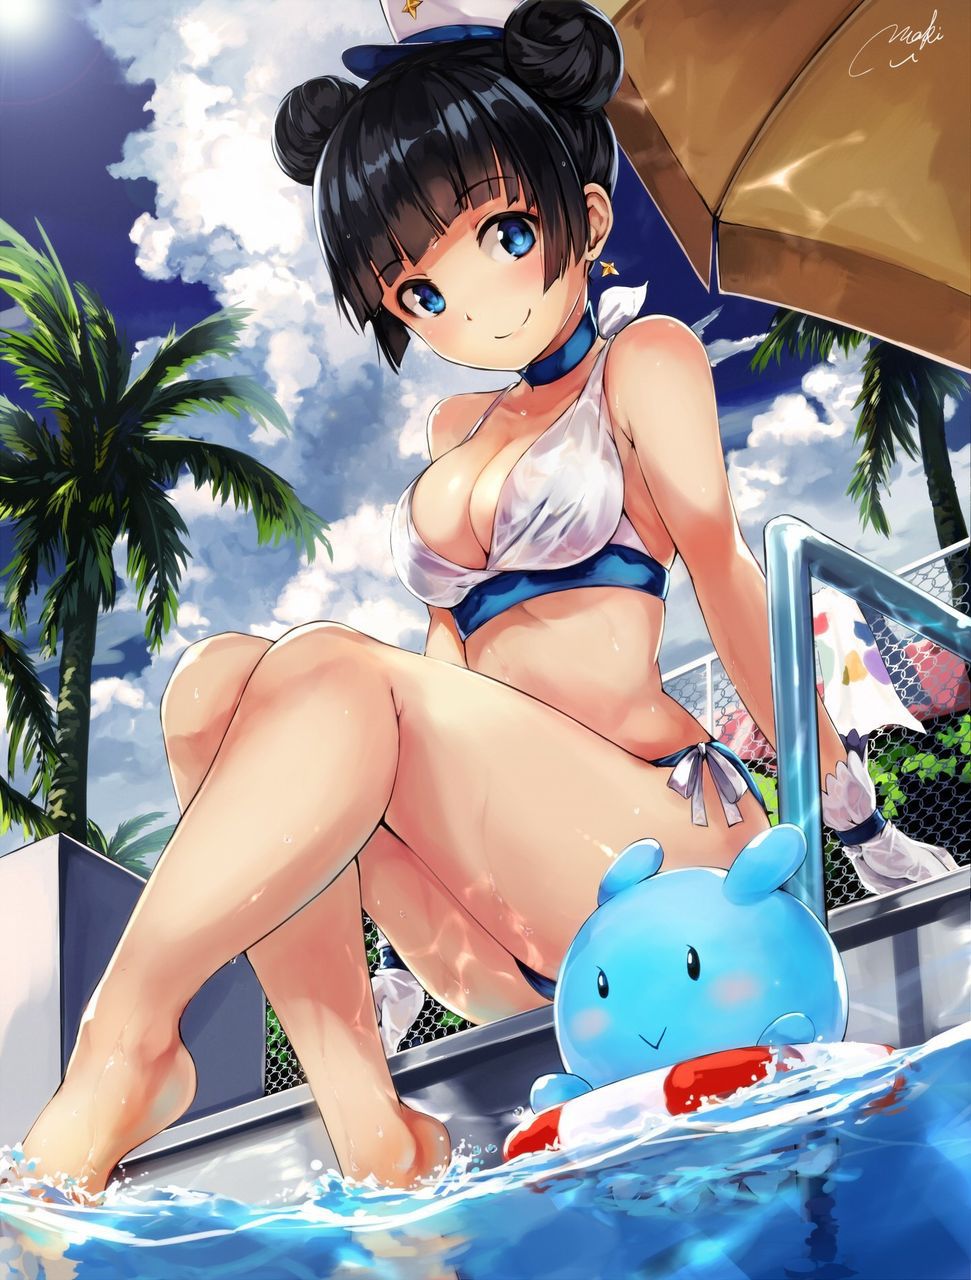 [2nd] Refreshing Blue sky is a beautiful secondary image 4 [non-erotic] 22